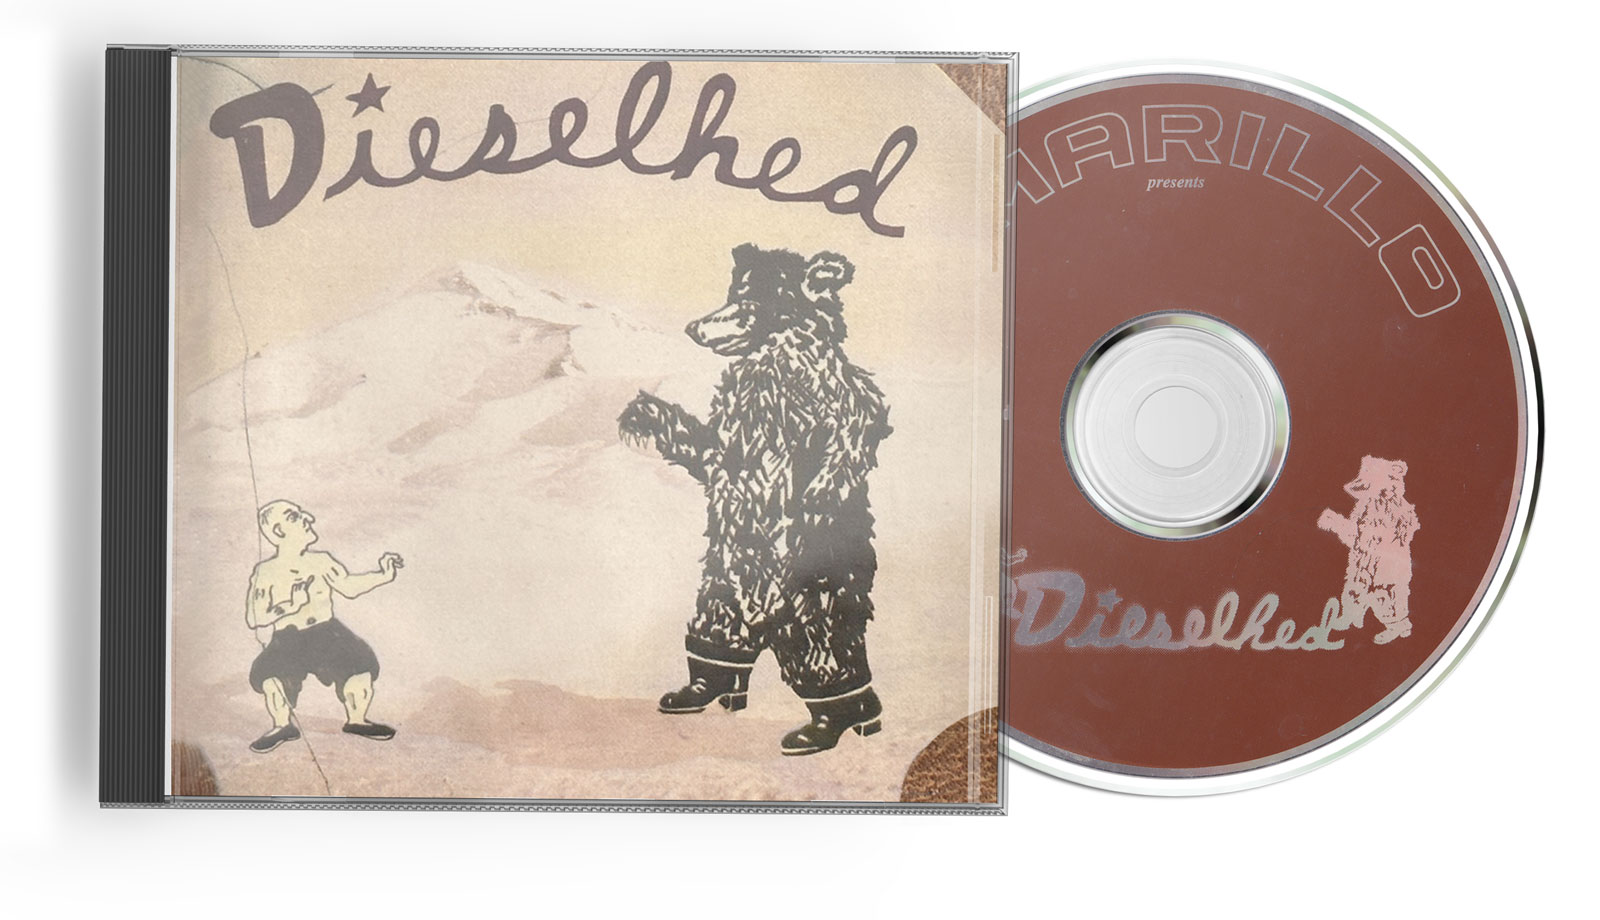 Dieselhed Self-Titled CD Album Cover